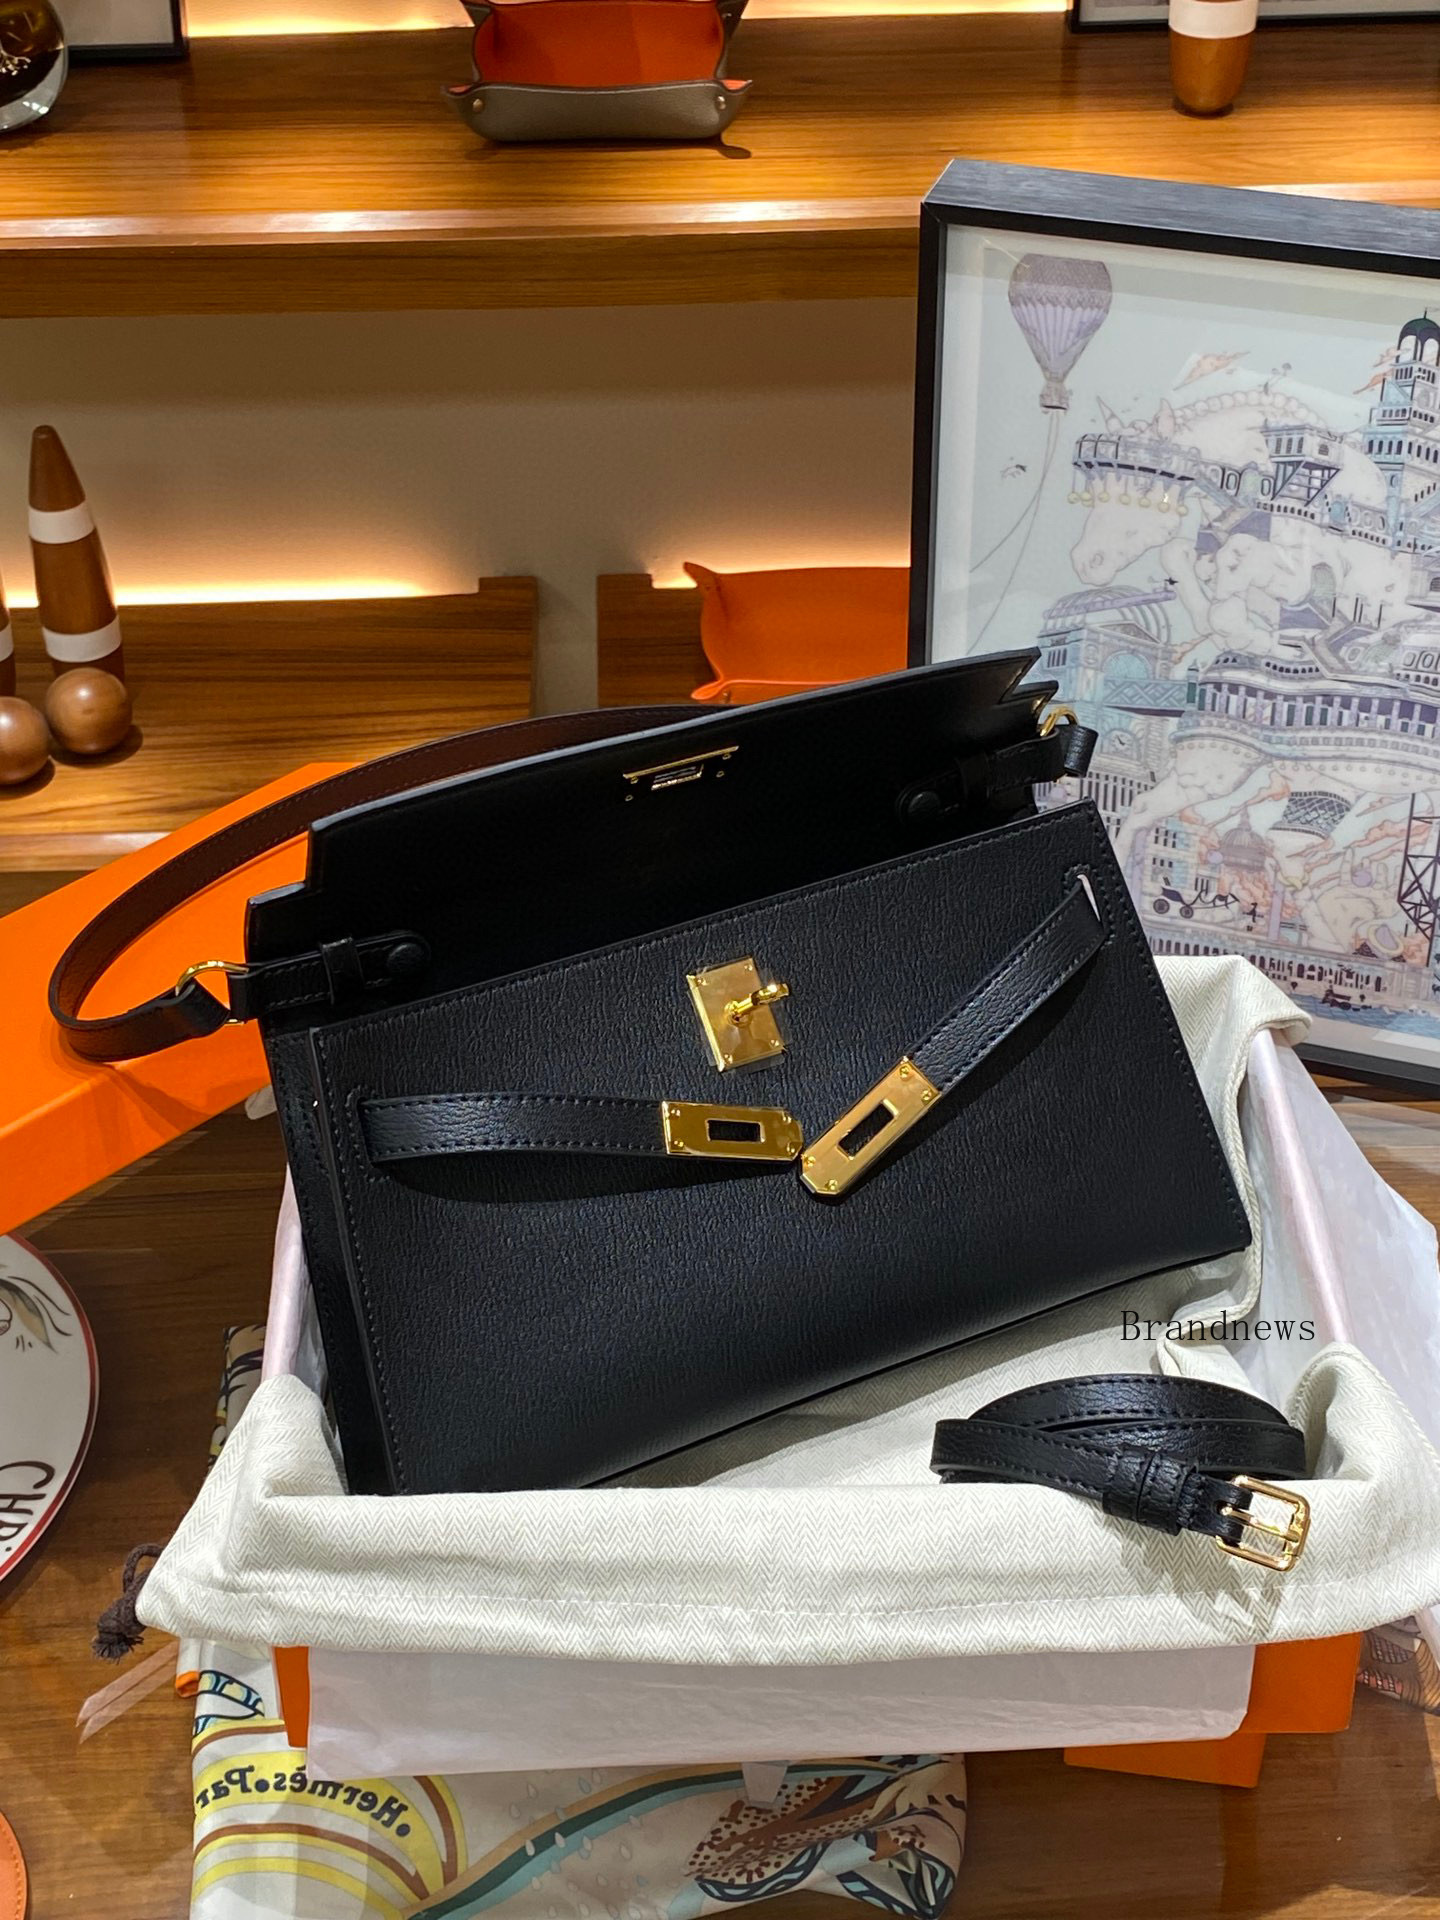 Women Designer Elan Real Leather Shoulder Bag Girl Fashion Messenger Bags Sling Purses Underarm Handbags Day Clutches 2023 New Cow Skin Totes With Two Belts 2484